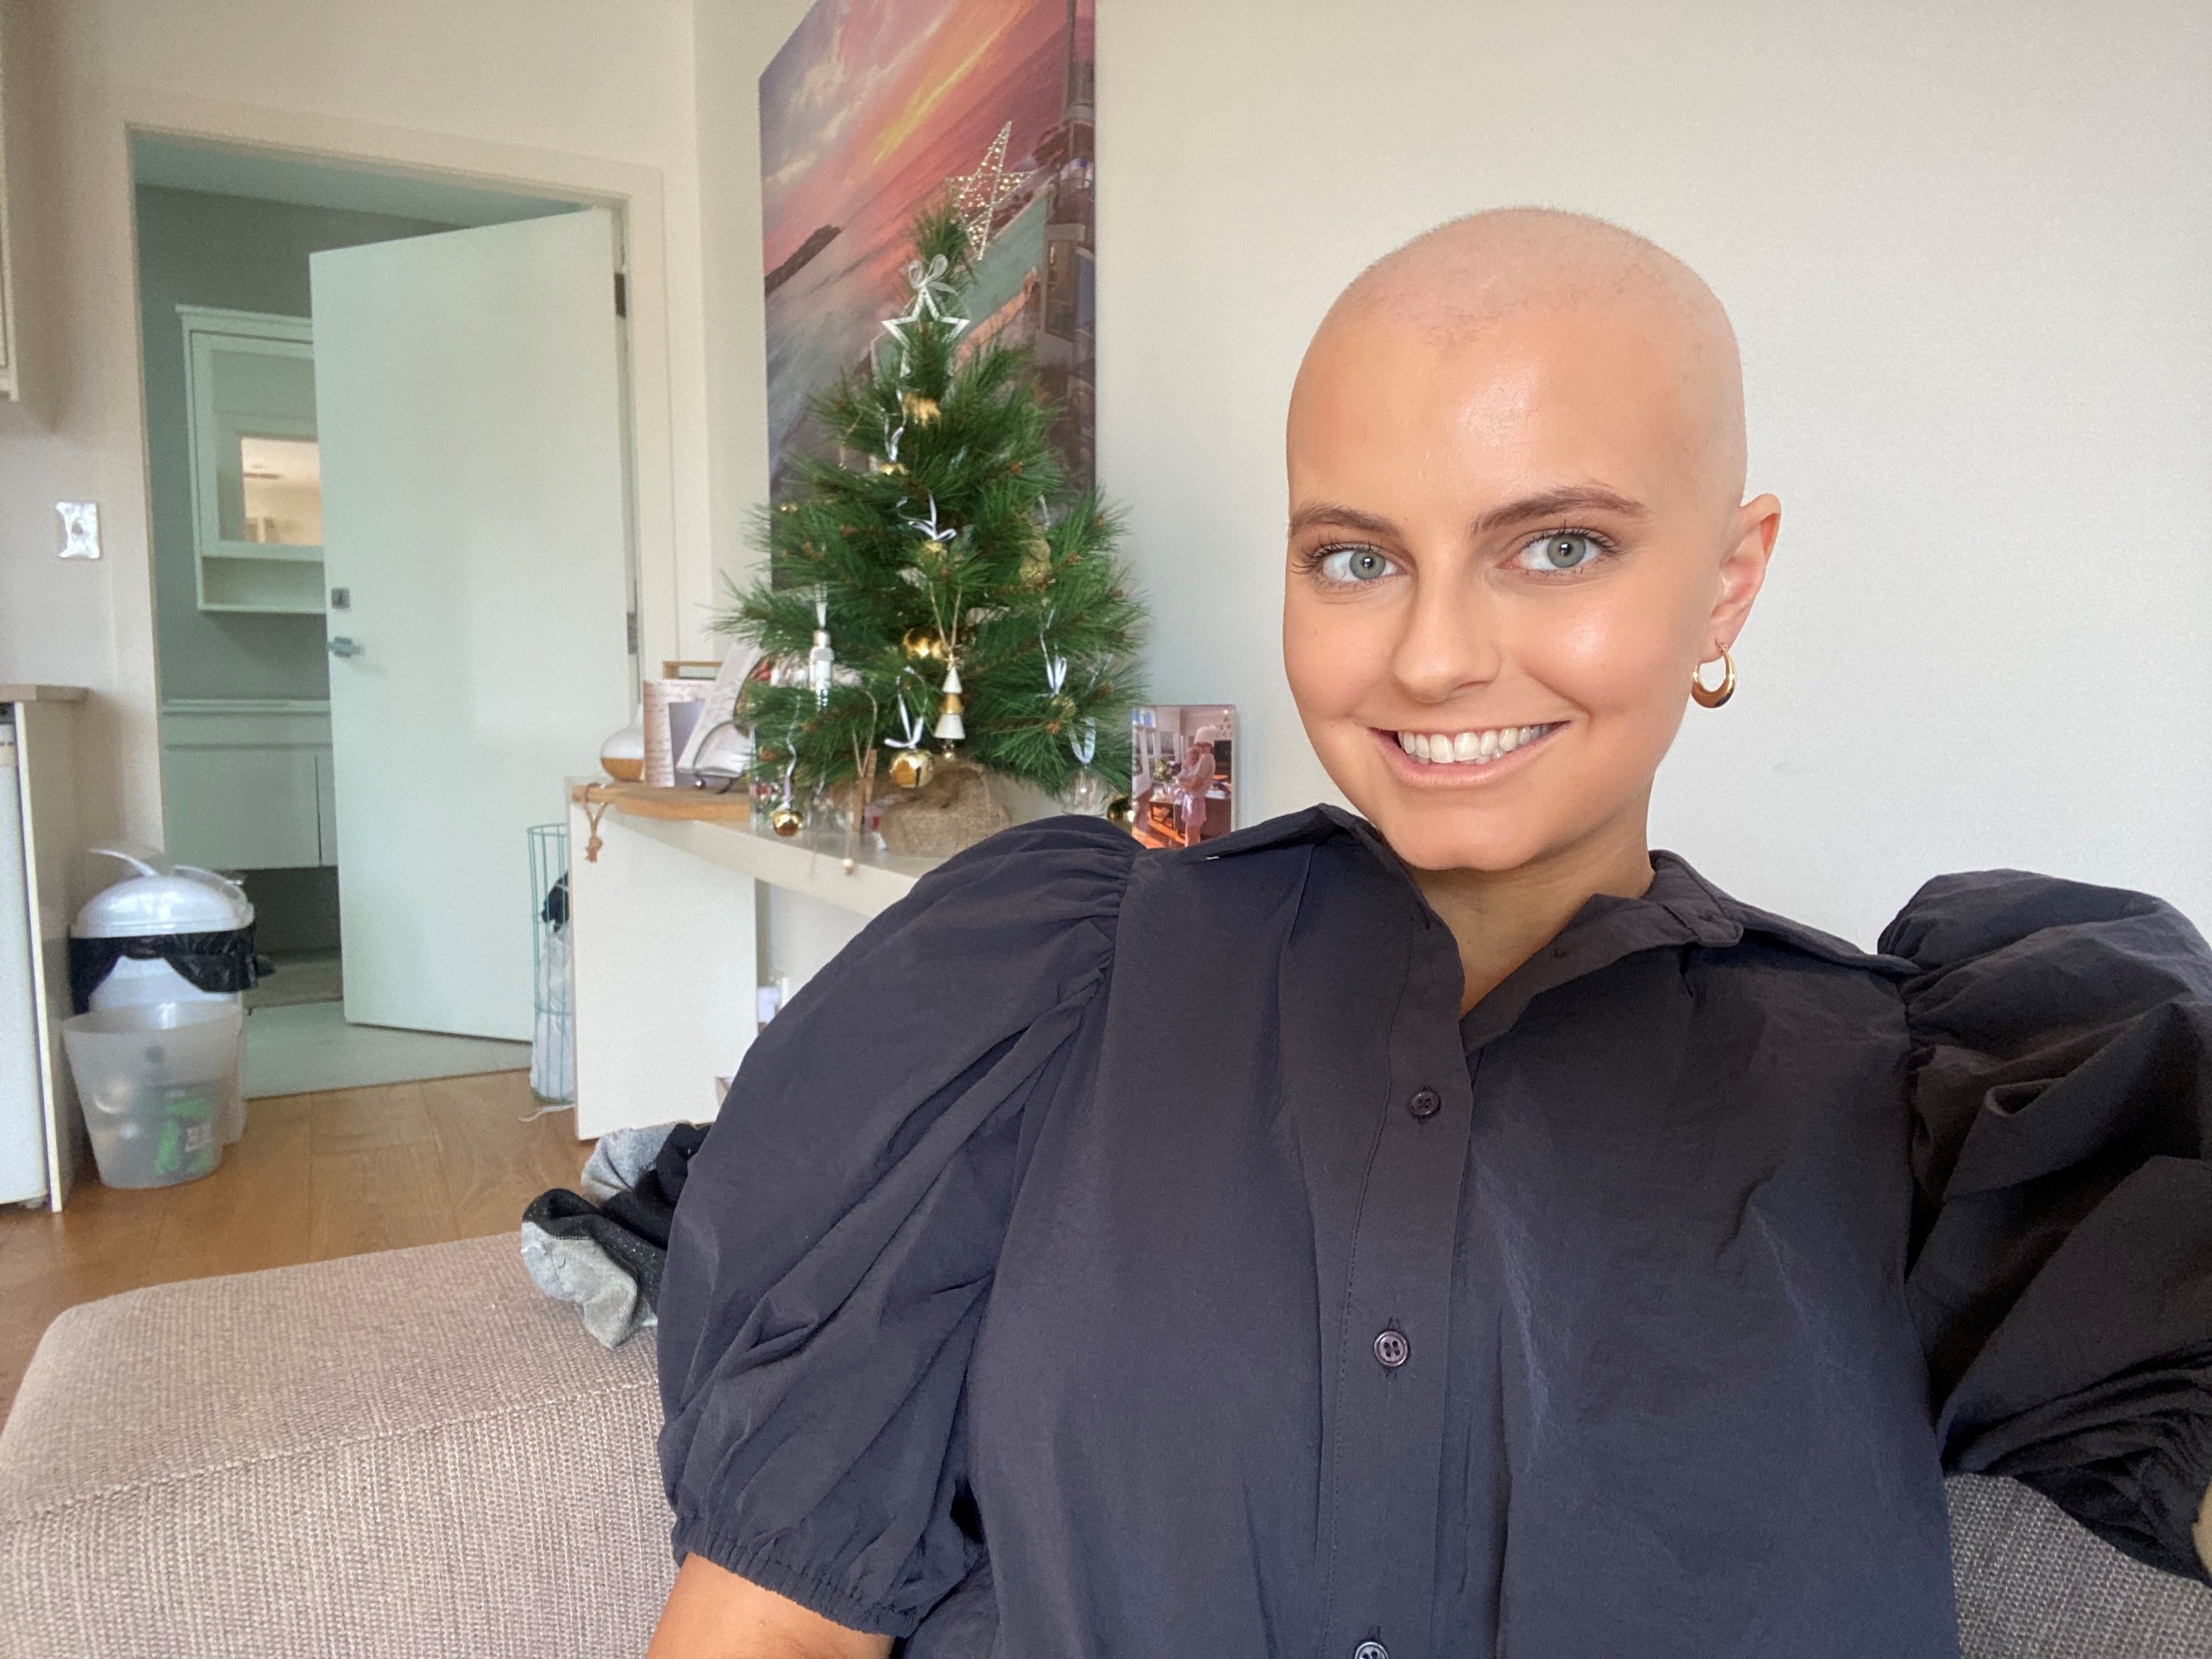 Bianca exactly one year after being diagnosed with blood cancer